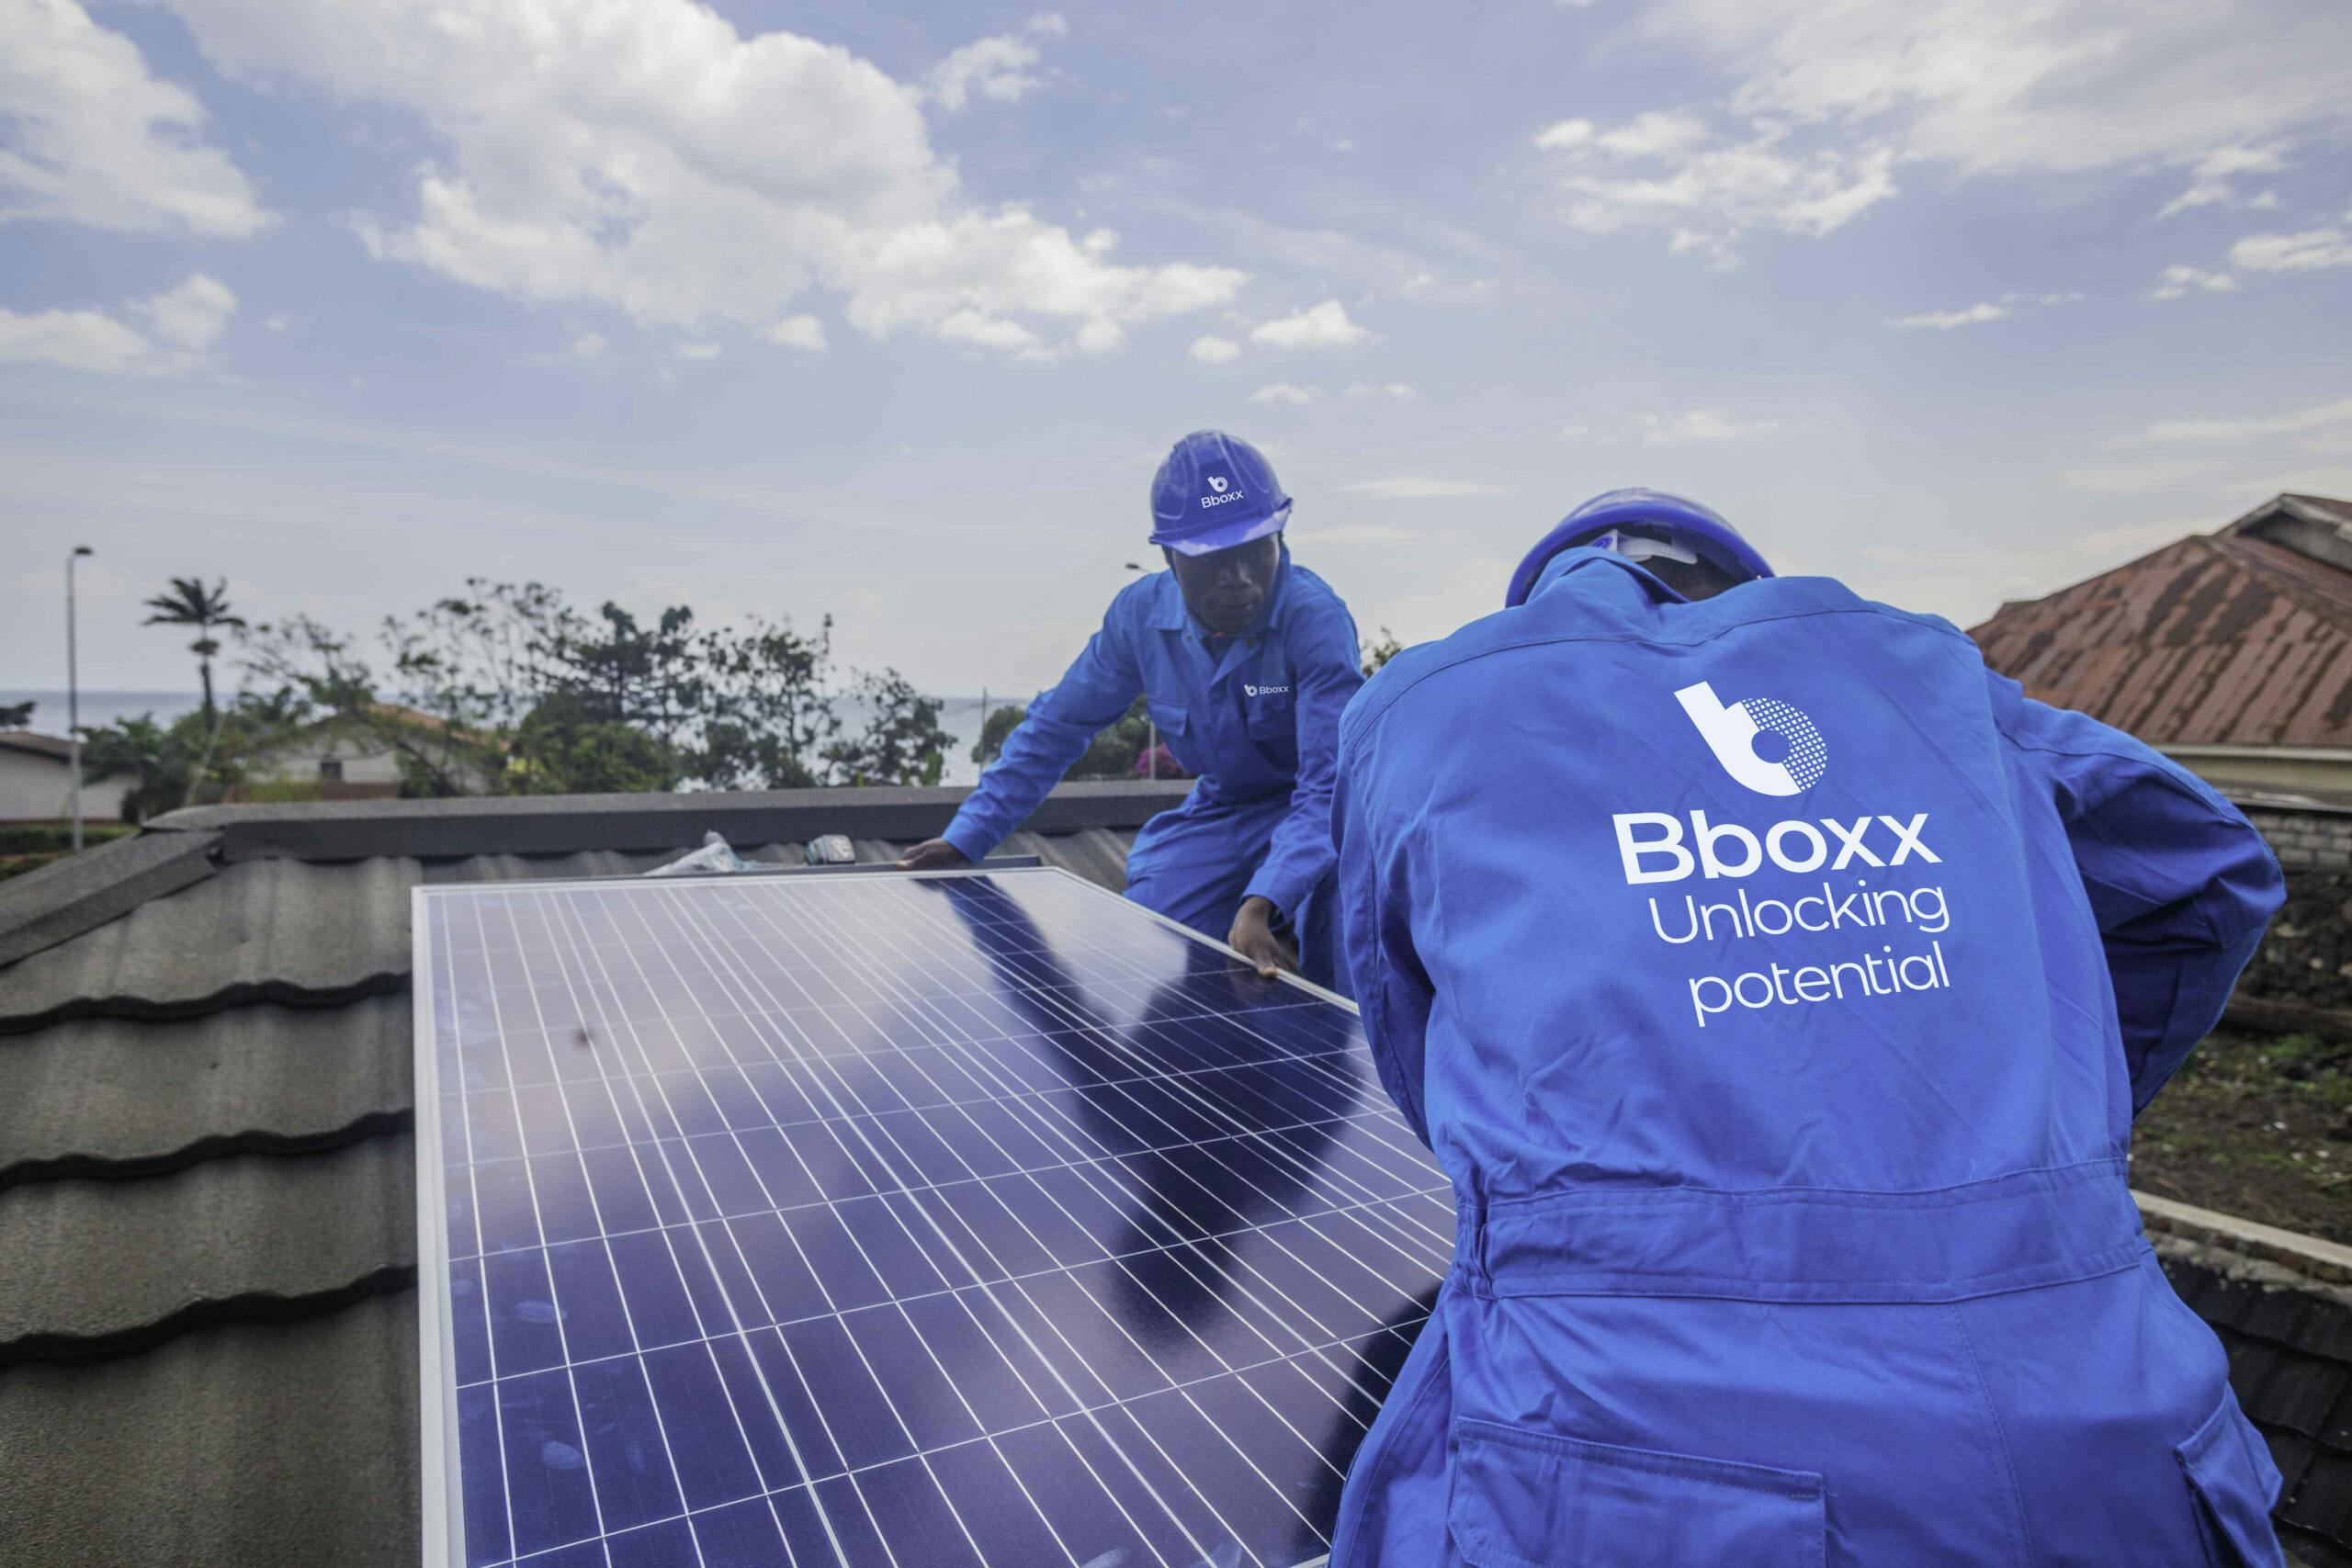 Two Engineers in PPE branded Bboxx working on solar panels